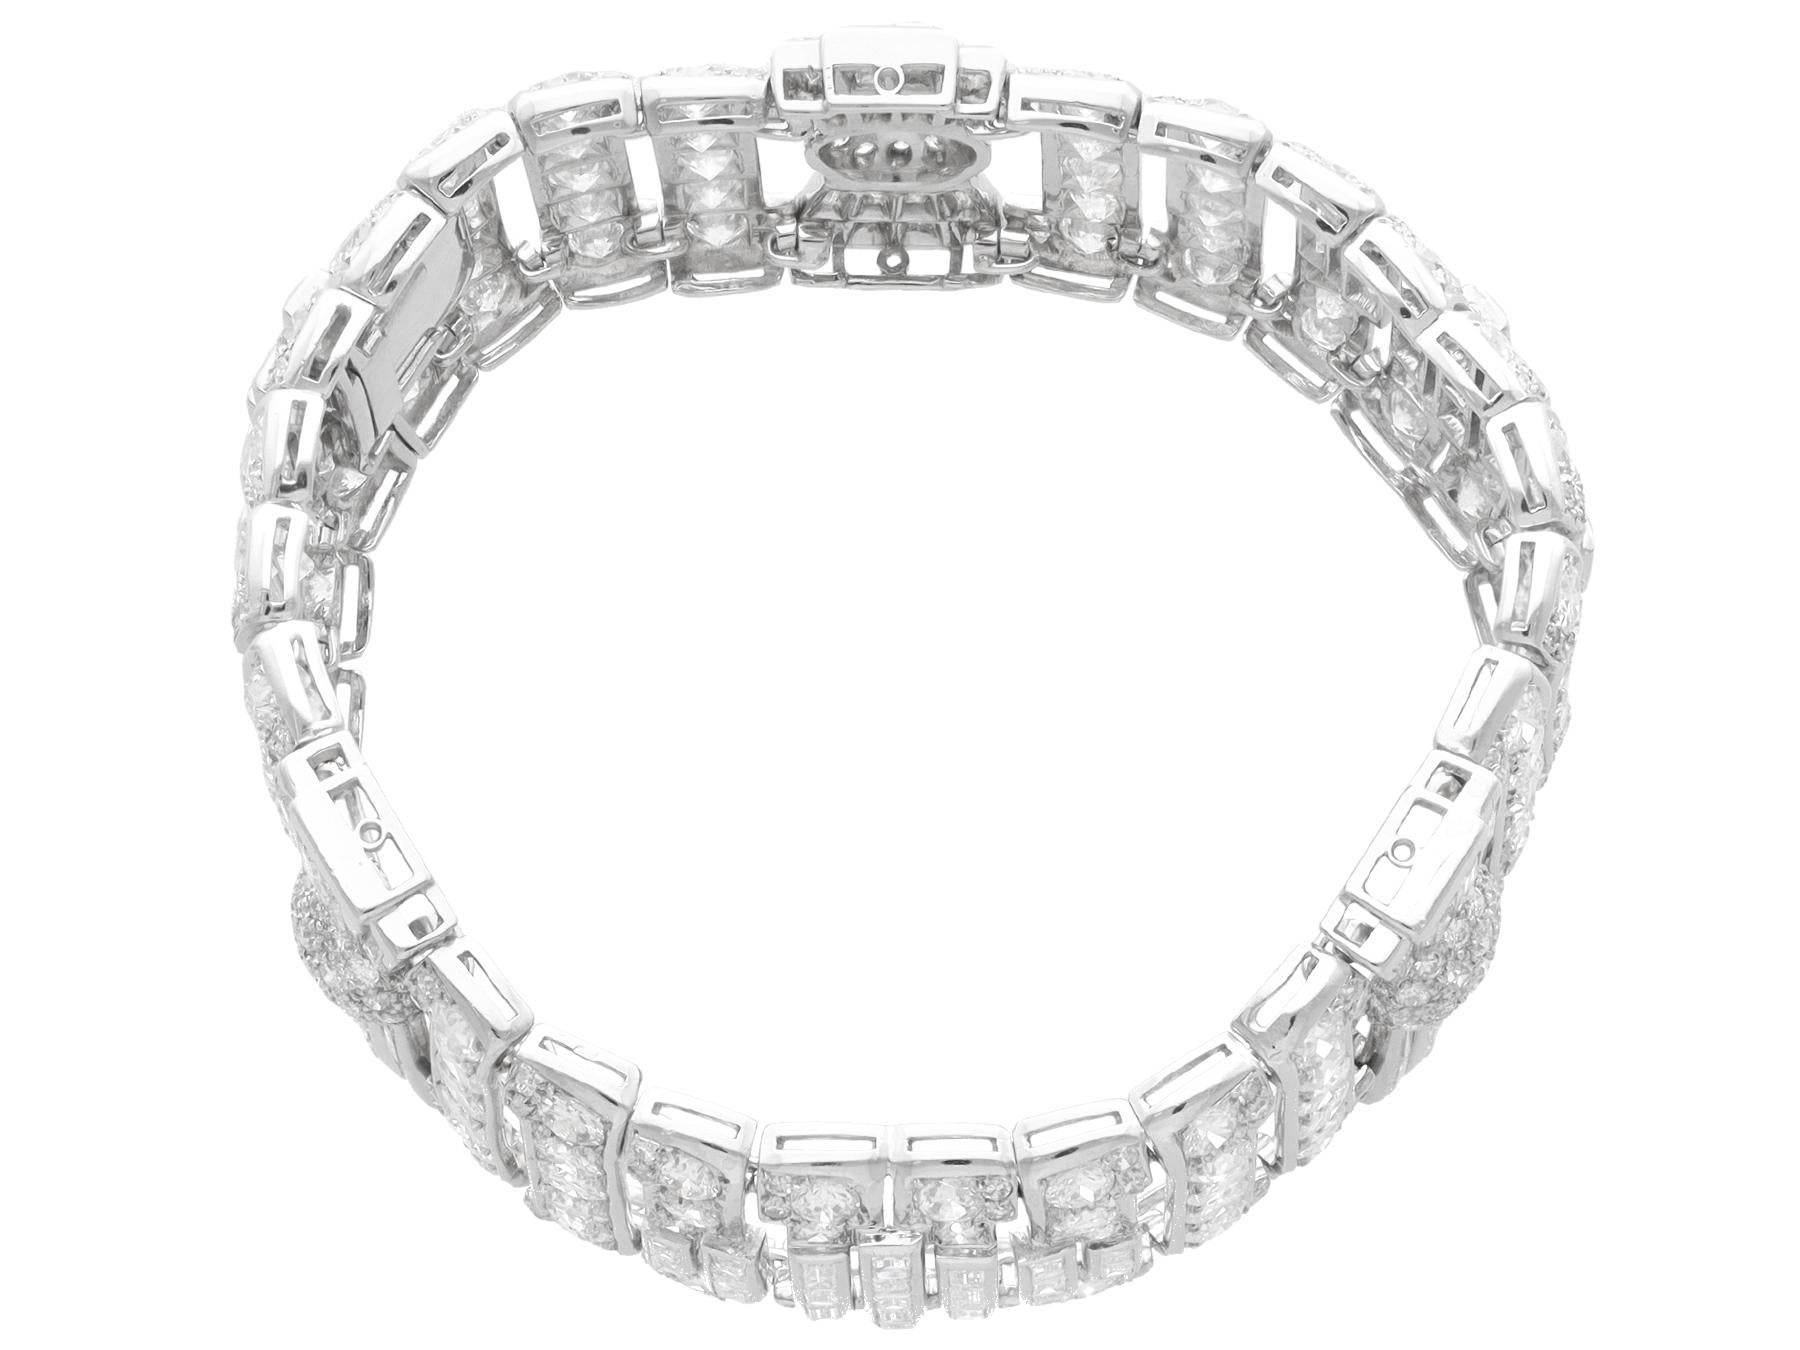 A magnificent, fine and impressive antique French 1930's 29.42 carat diamond and 18k white gold Art Deco bracelet; part of our diverse antique jewellery and estate jewelry collections.

This magnificent, fine and impressive antique diamond bracelet